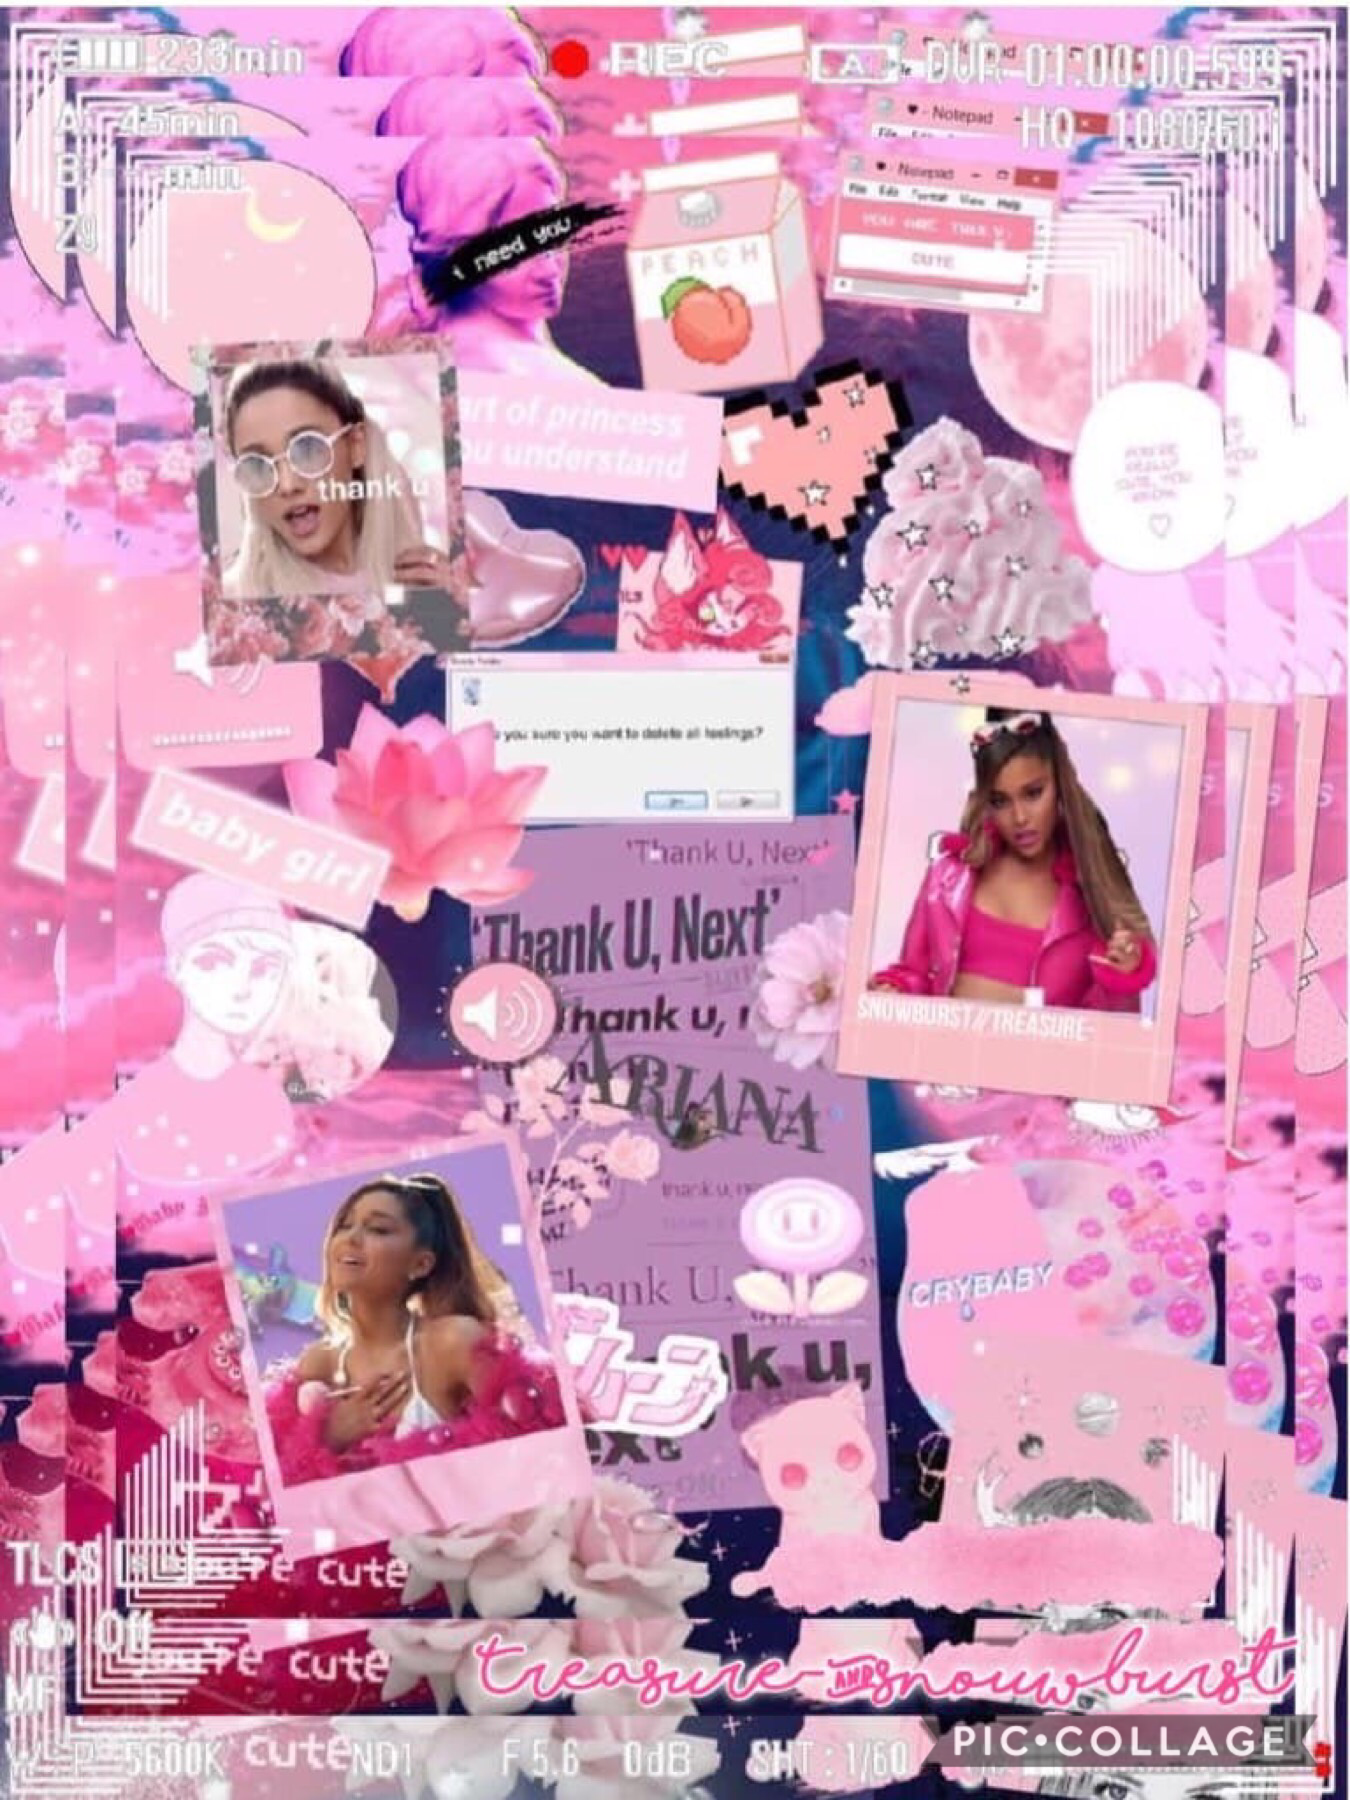 Tap💓
Collab with snowburst❤️
Follow her she’s amazing
Second collage for my new theme 